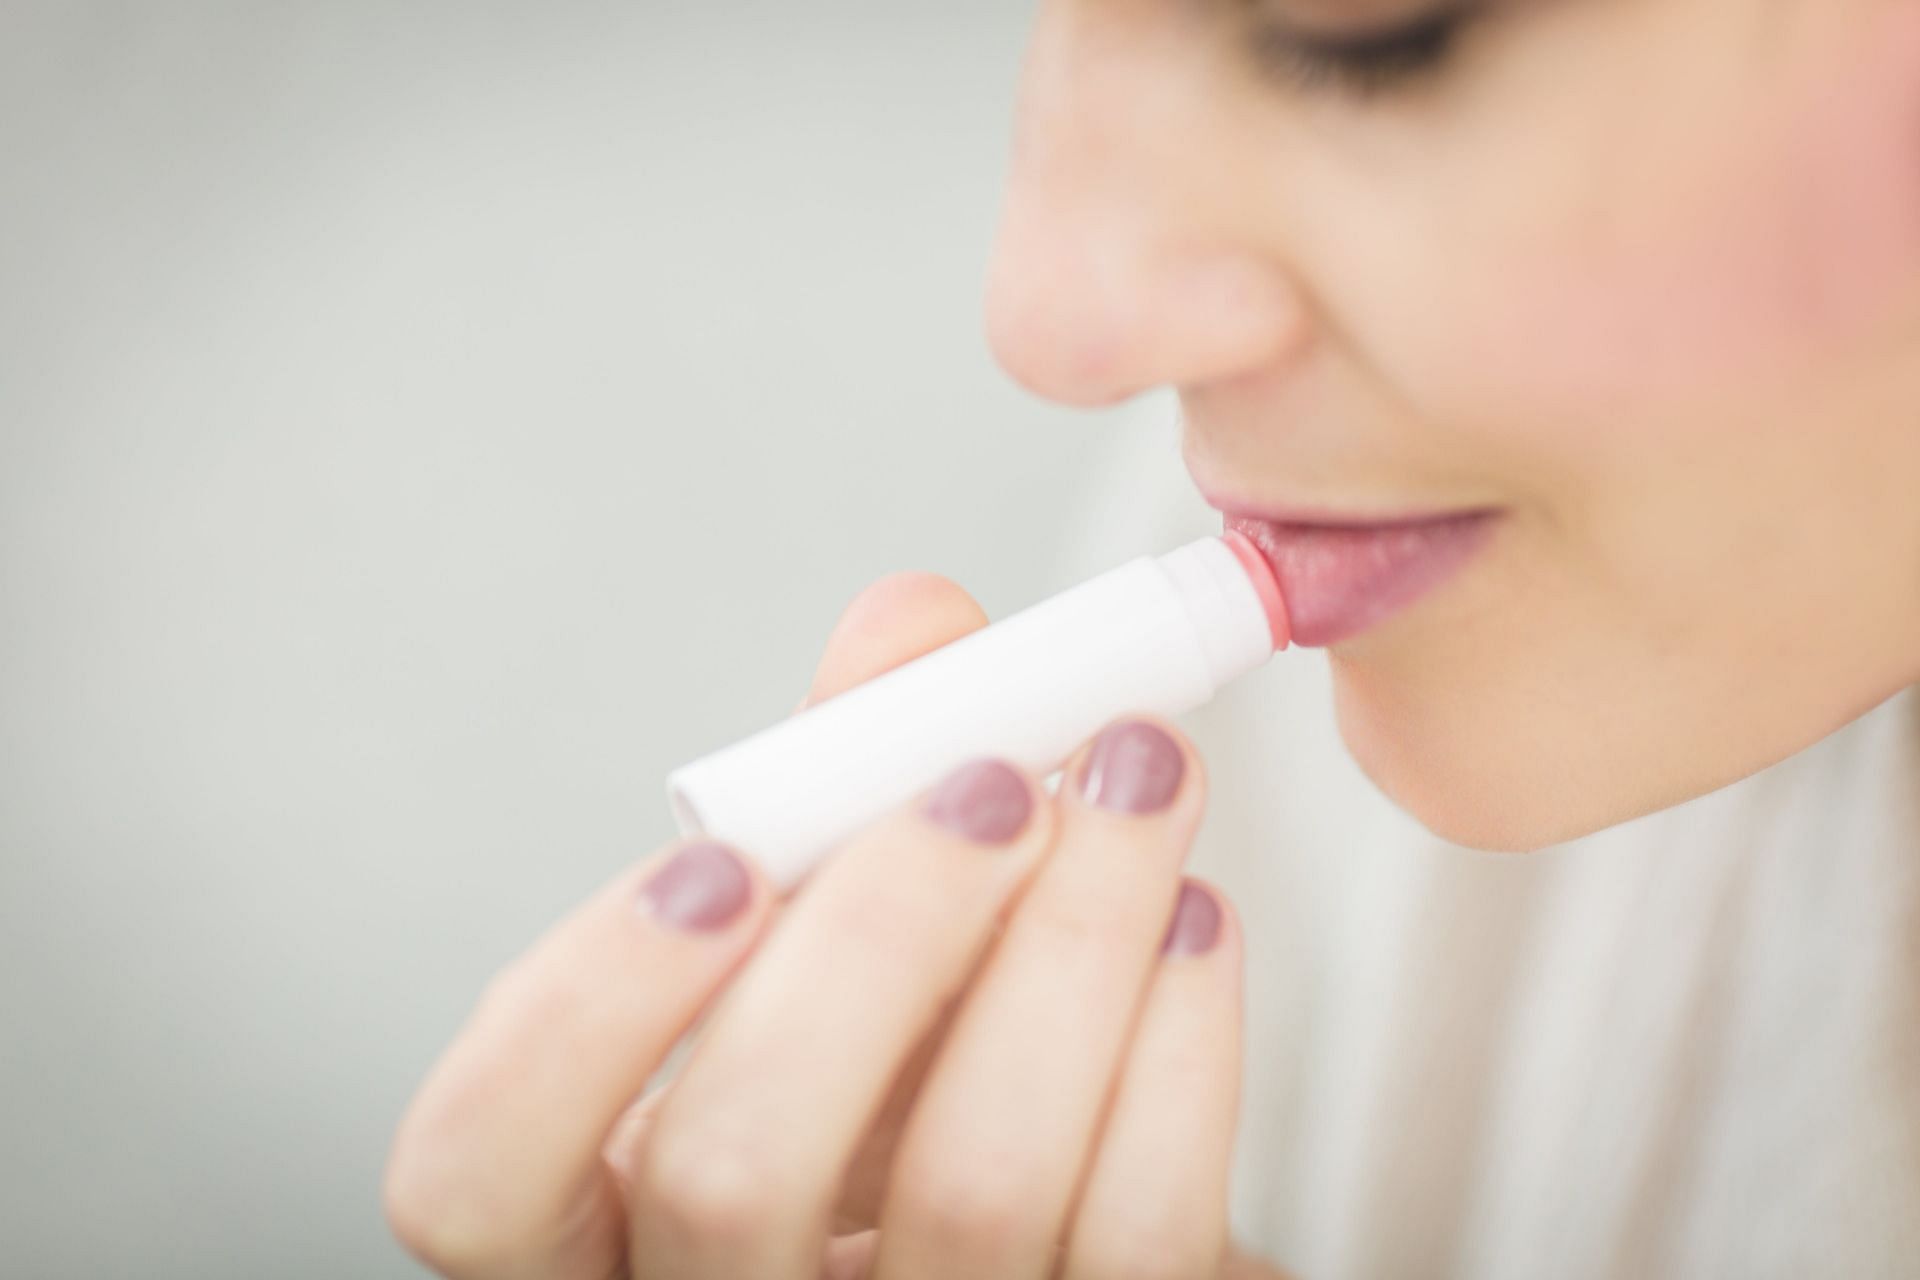 Chapped lips for healthy skin in winters (image sourced via Pexels / Photo by Burst)